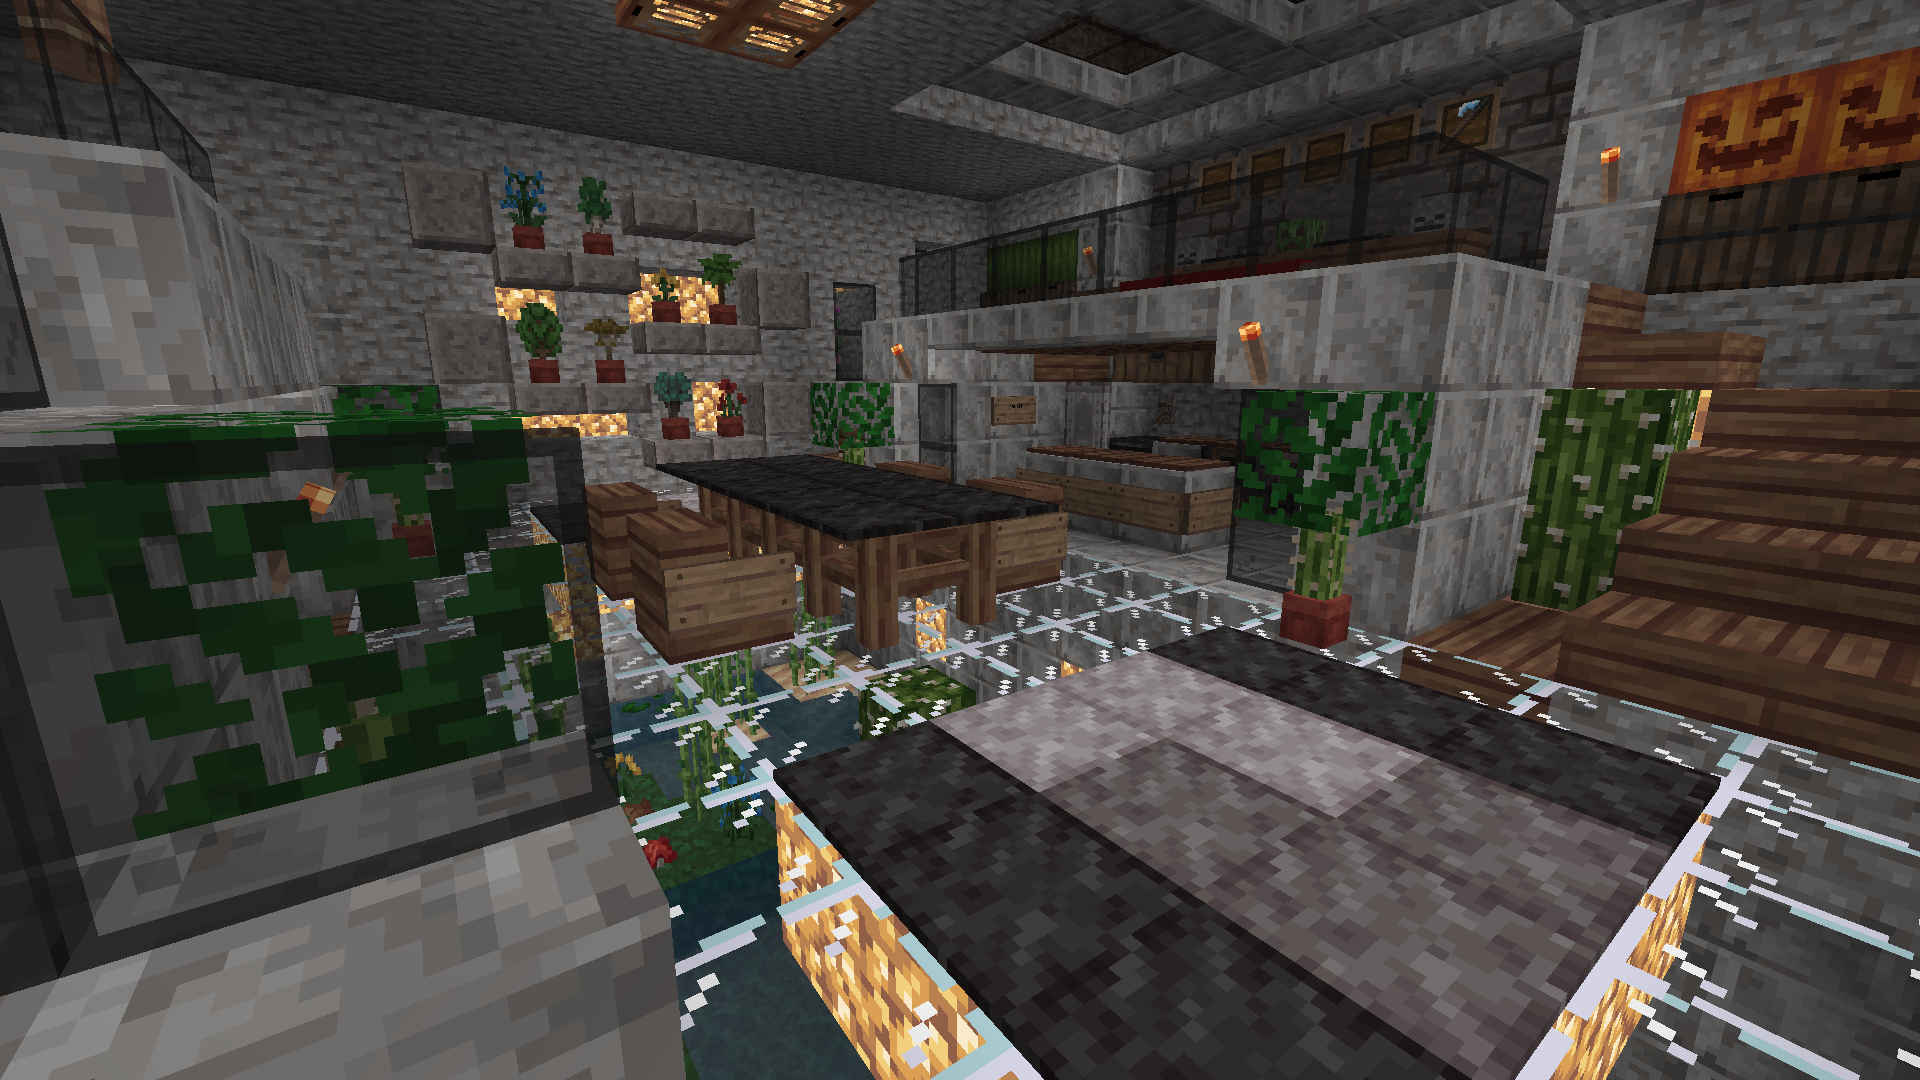 Interior decoration built by a player